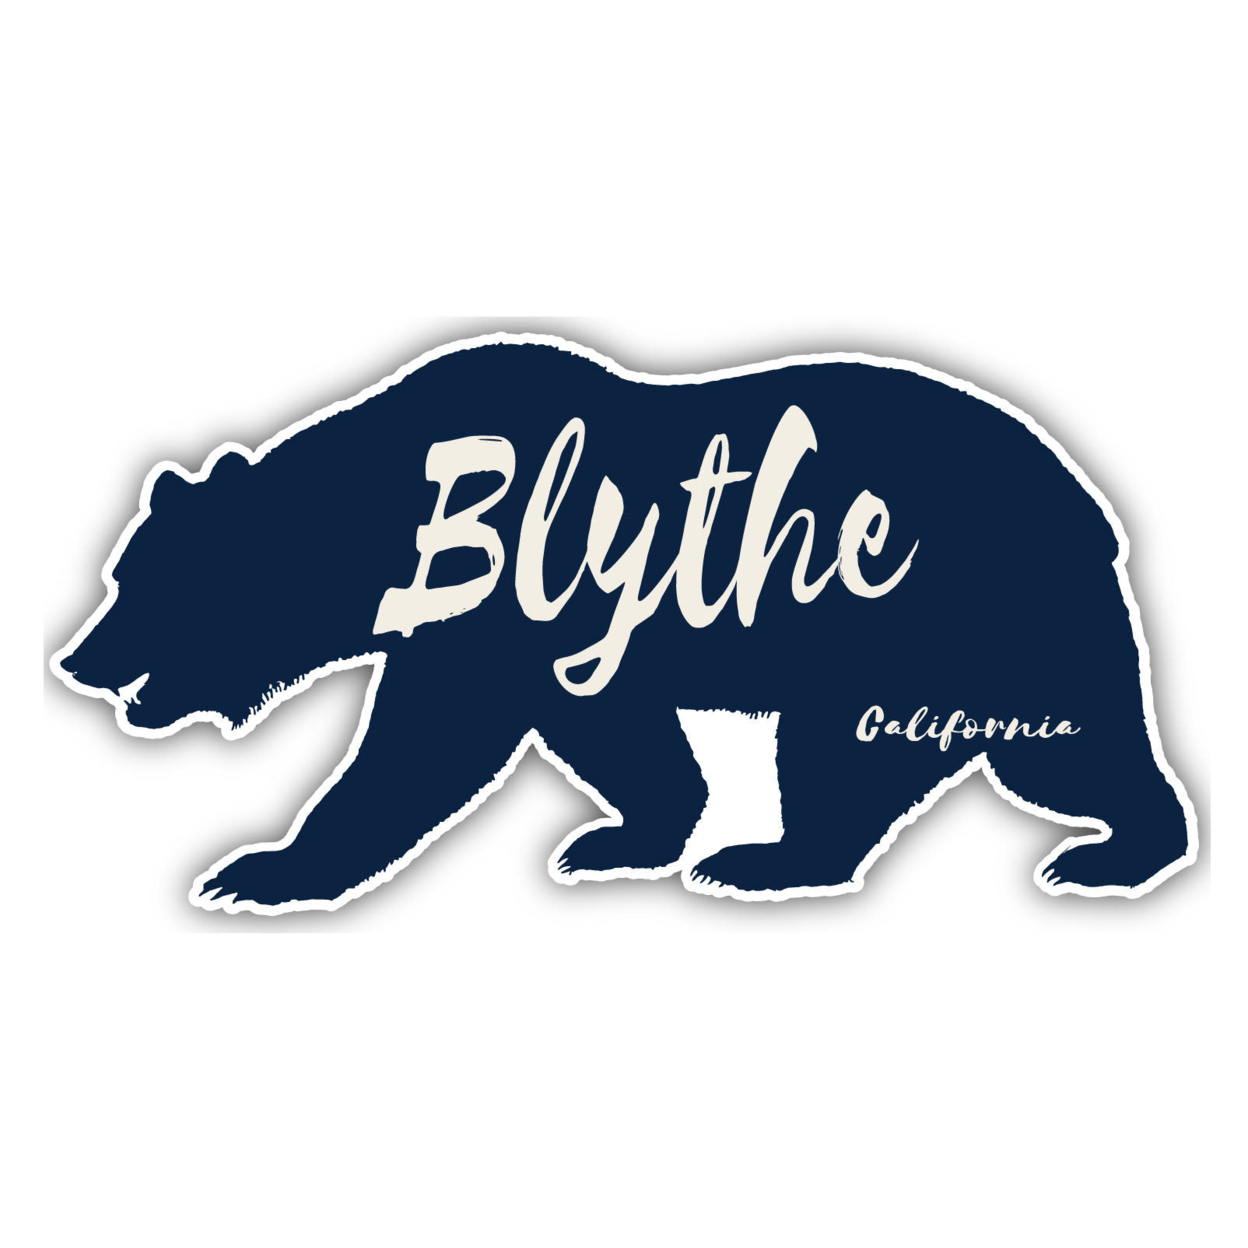 Blythe California Souvenir Decorative Stickers (Choose Theme And Size) - Single Unit, 8-Inch, Great Outdoors